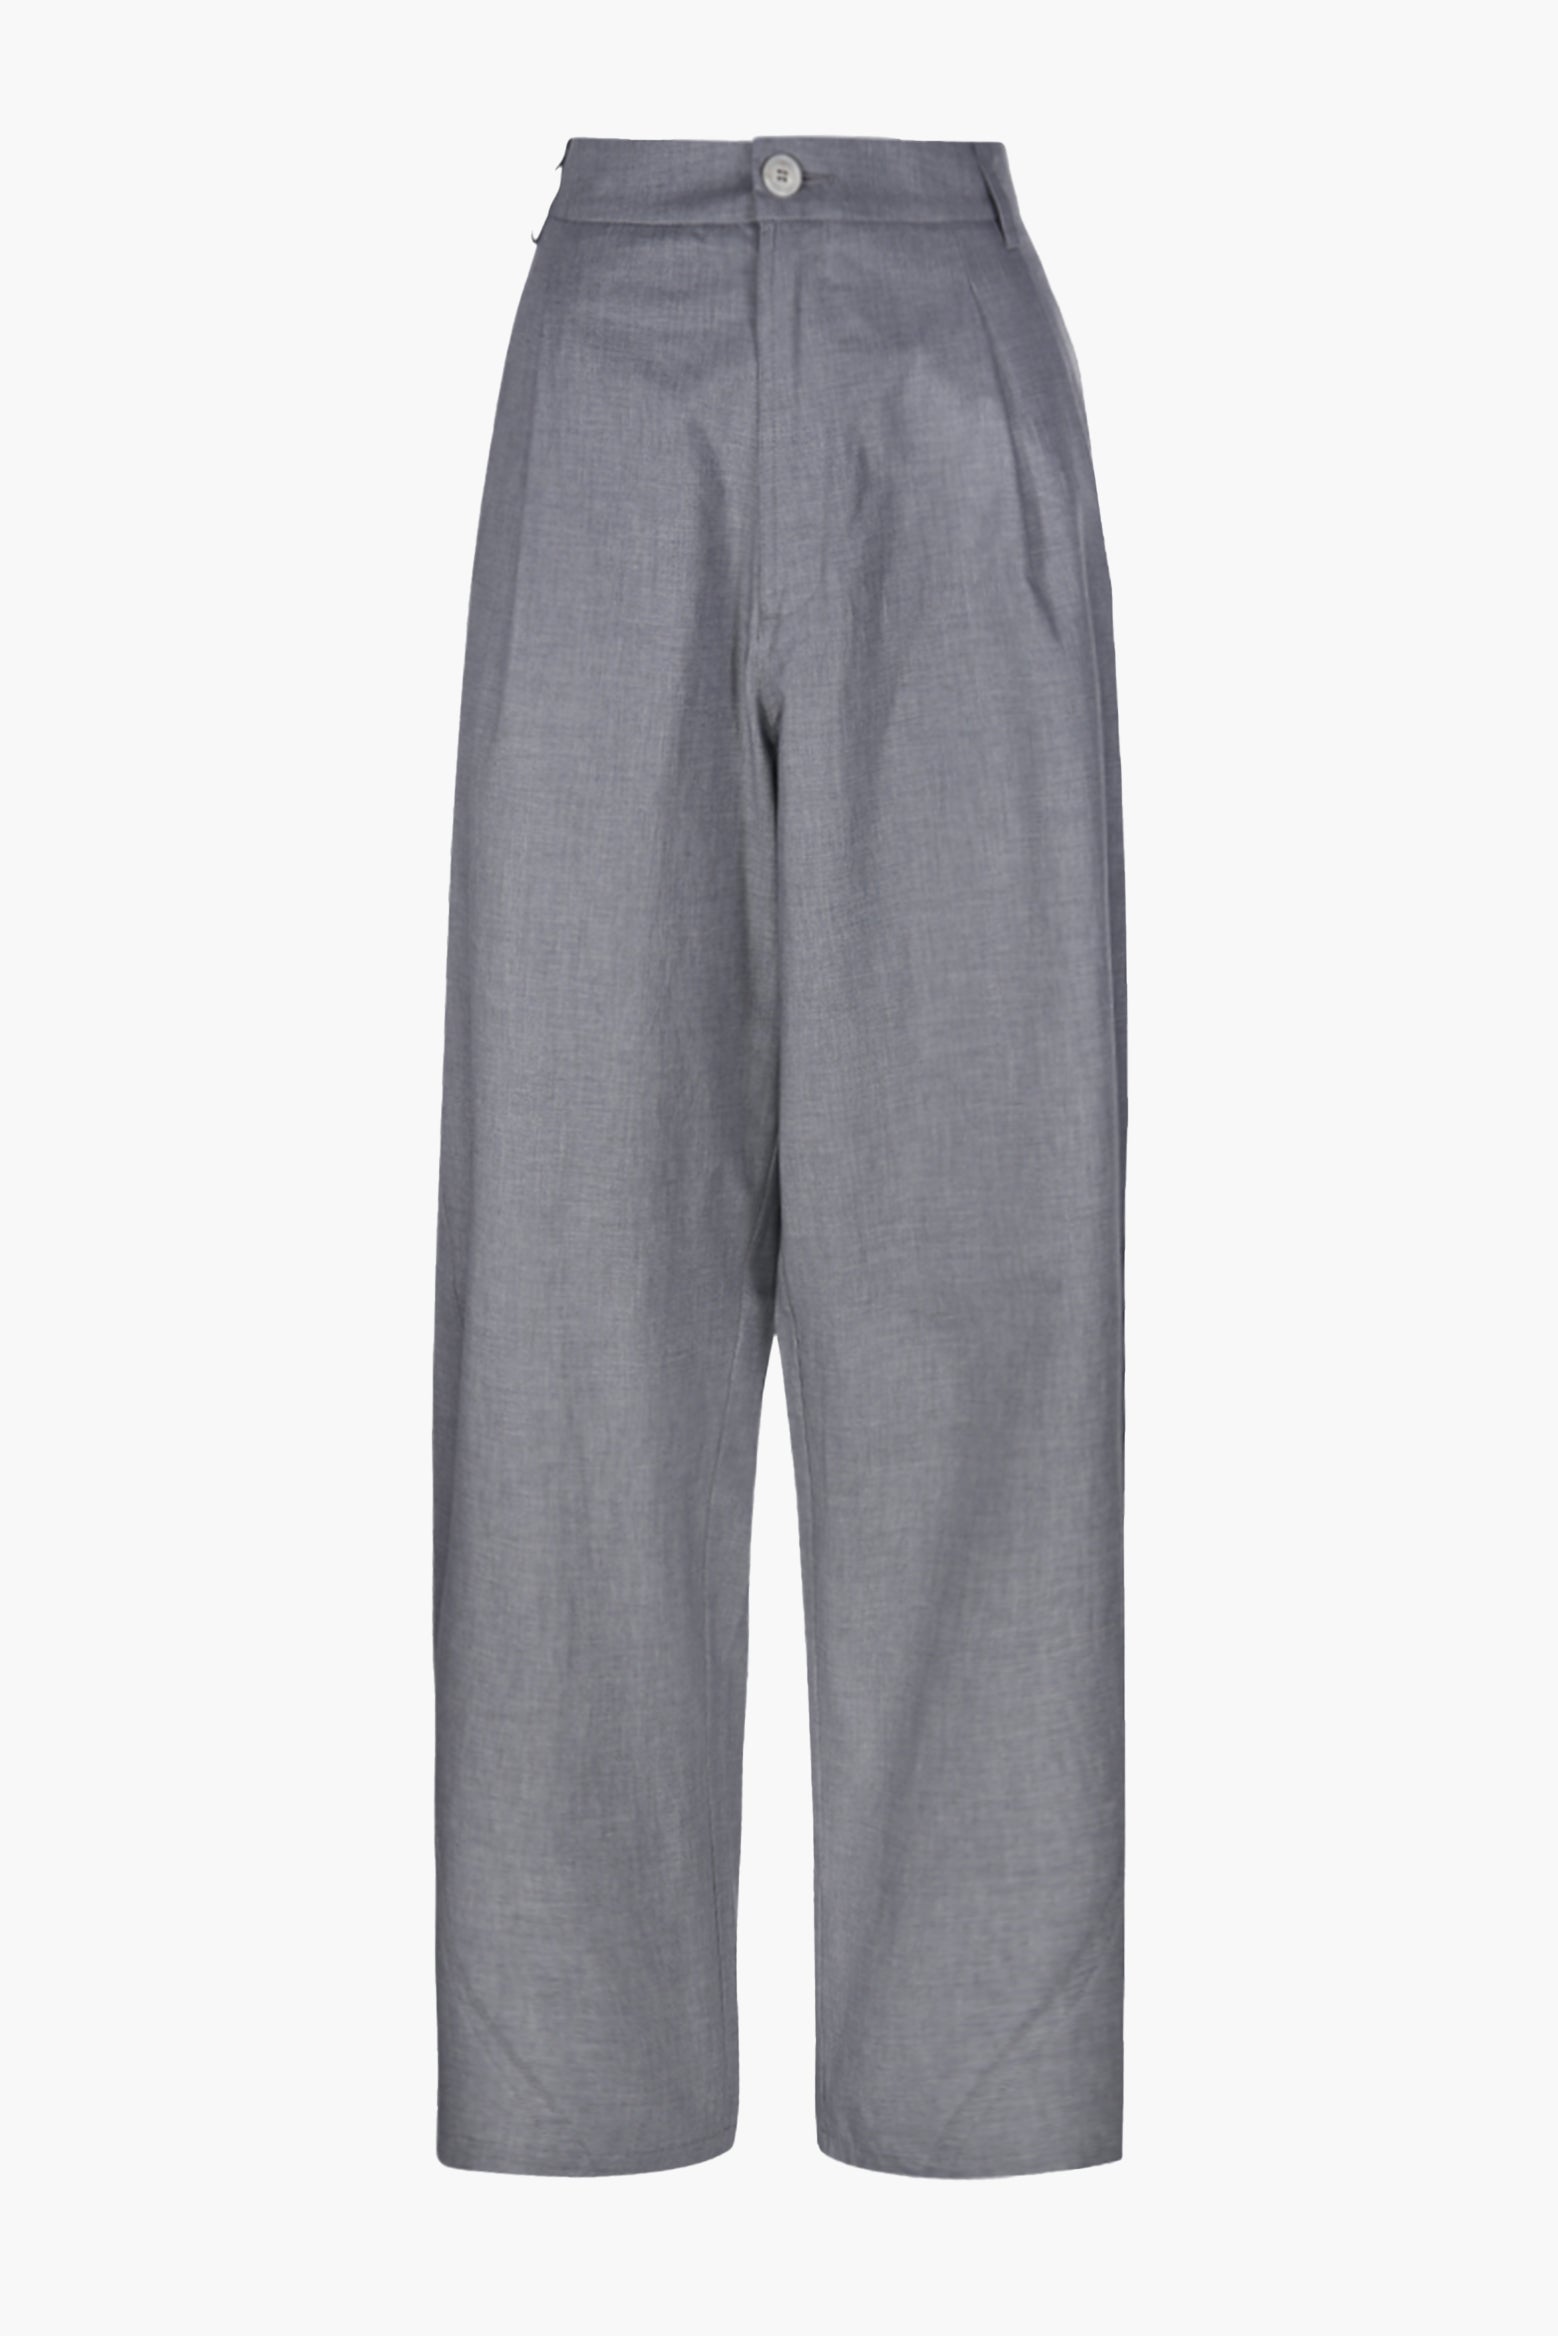 Darkpark Phebe Wide Leg Pants in Grey Melange available at The New Trend Australia.